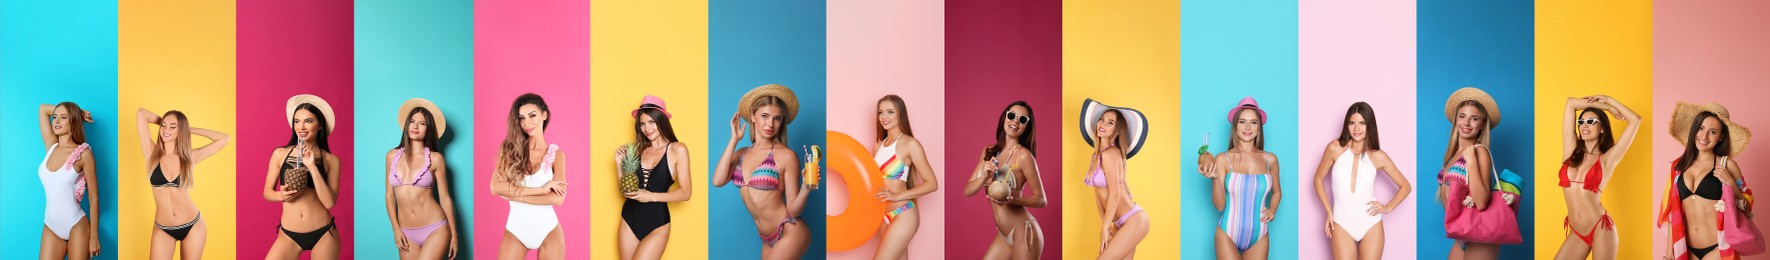 Collage with beautiful photos themed to summer party and vacation. Pretty young women wearing swimsuits on different color backgrounds, banner design